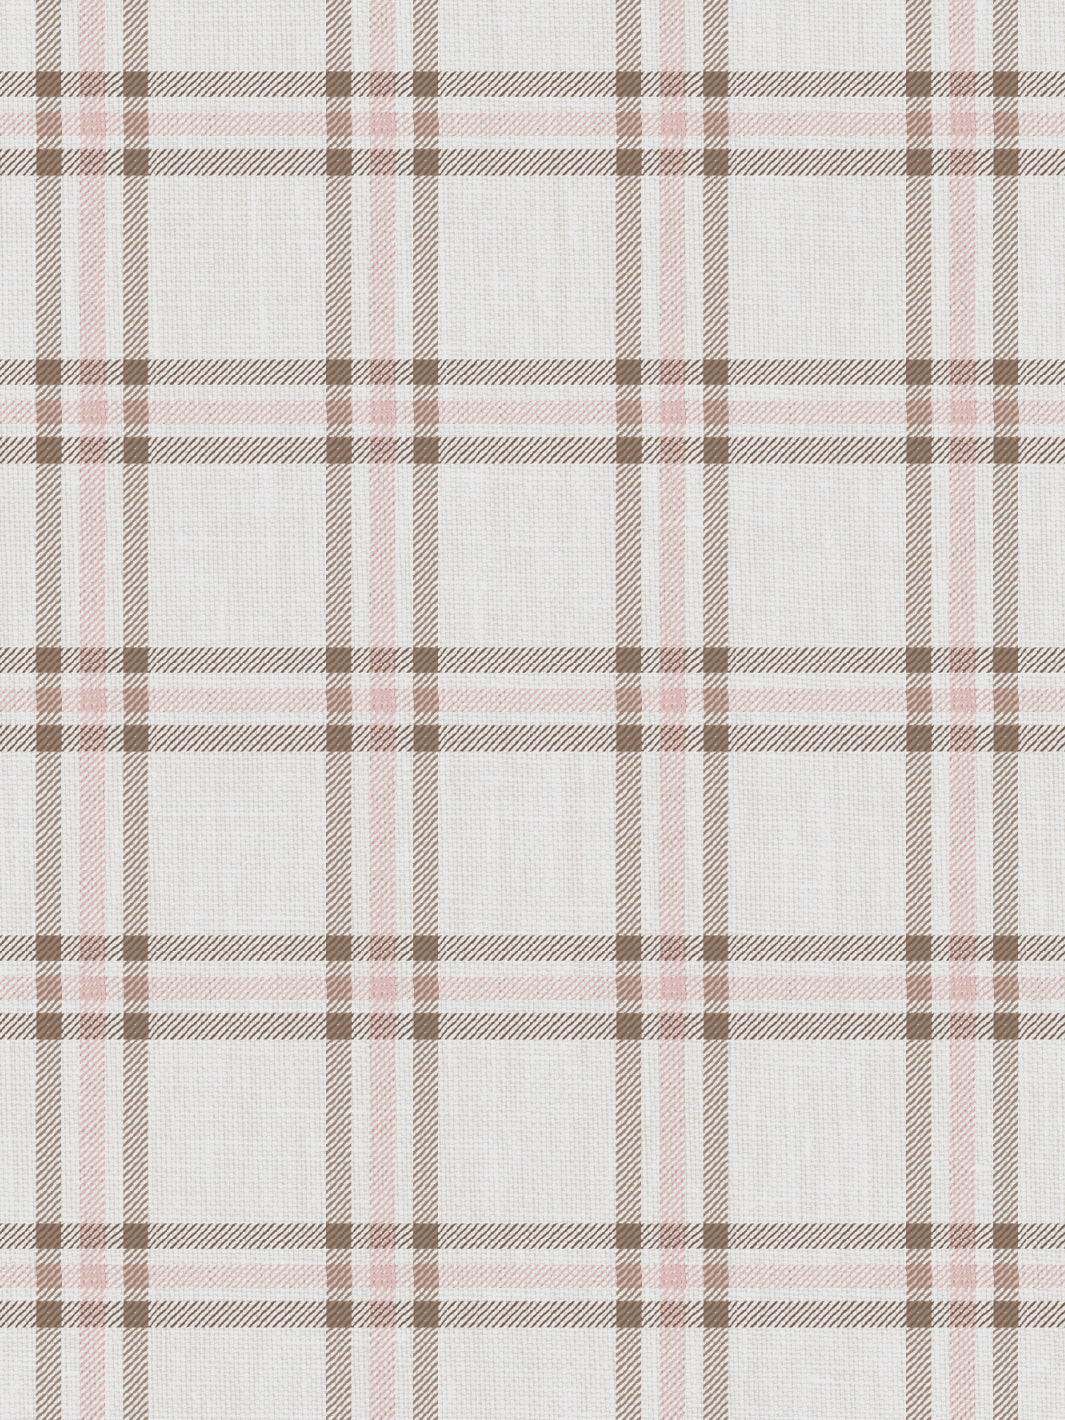 'Rogers Plaid' Wallpaper by Nathan Turner - Brown Pink